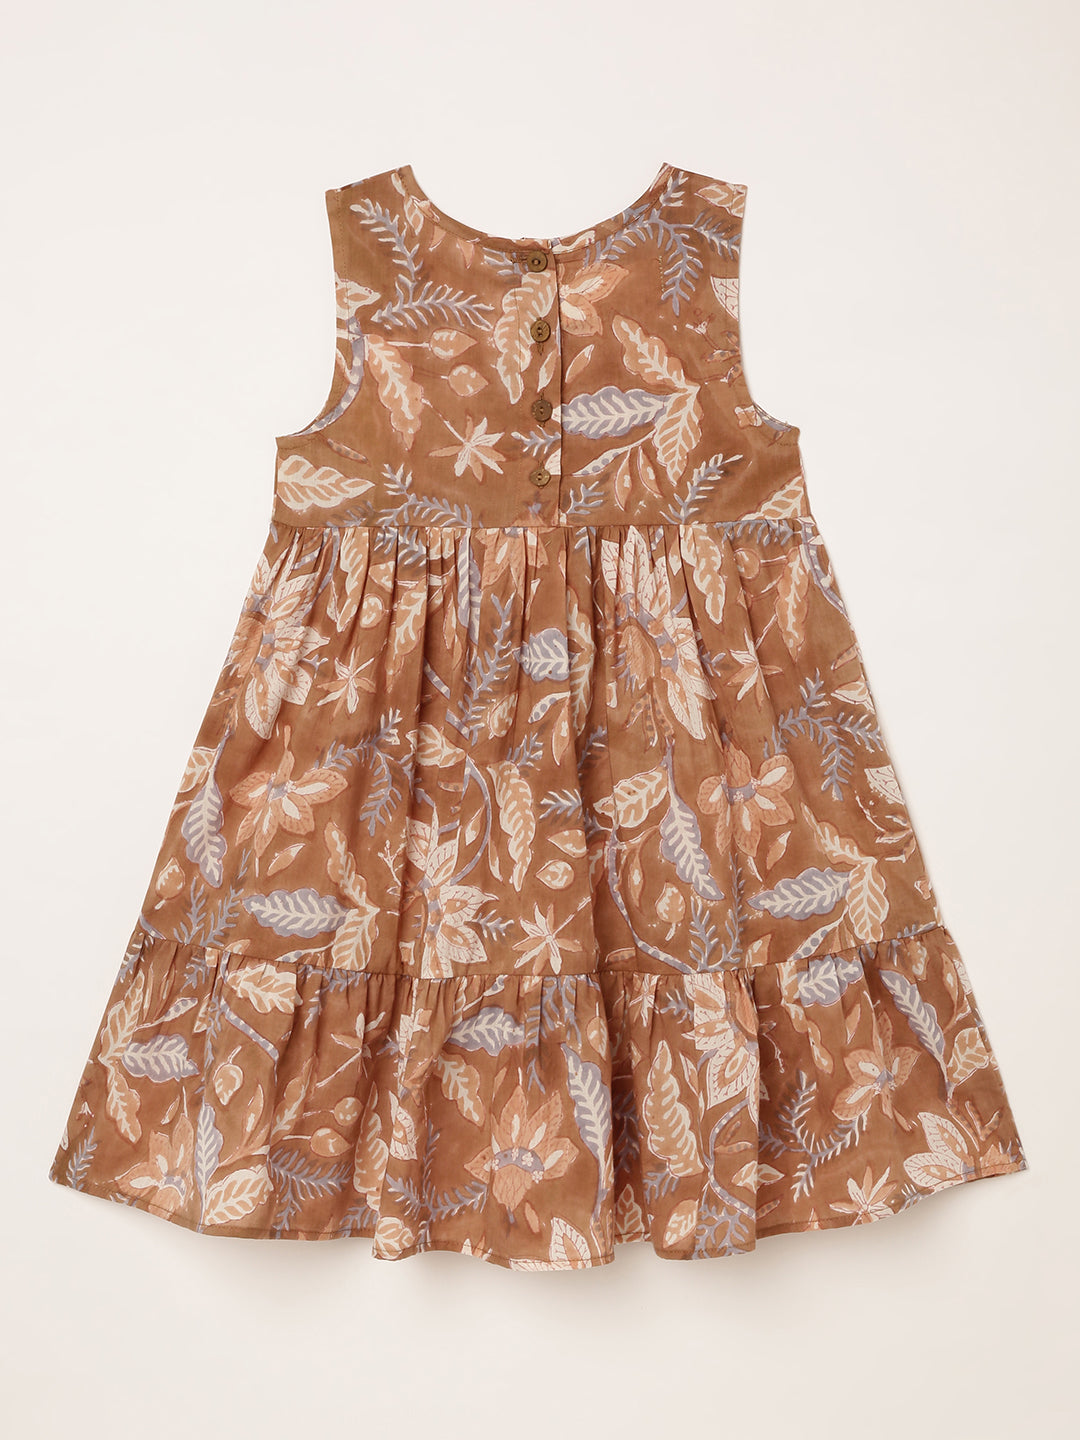 Sleeveless dress for girls with brown and lavender block print. Ages 1-8 years - Back